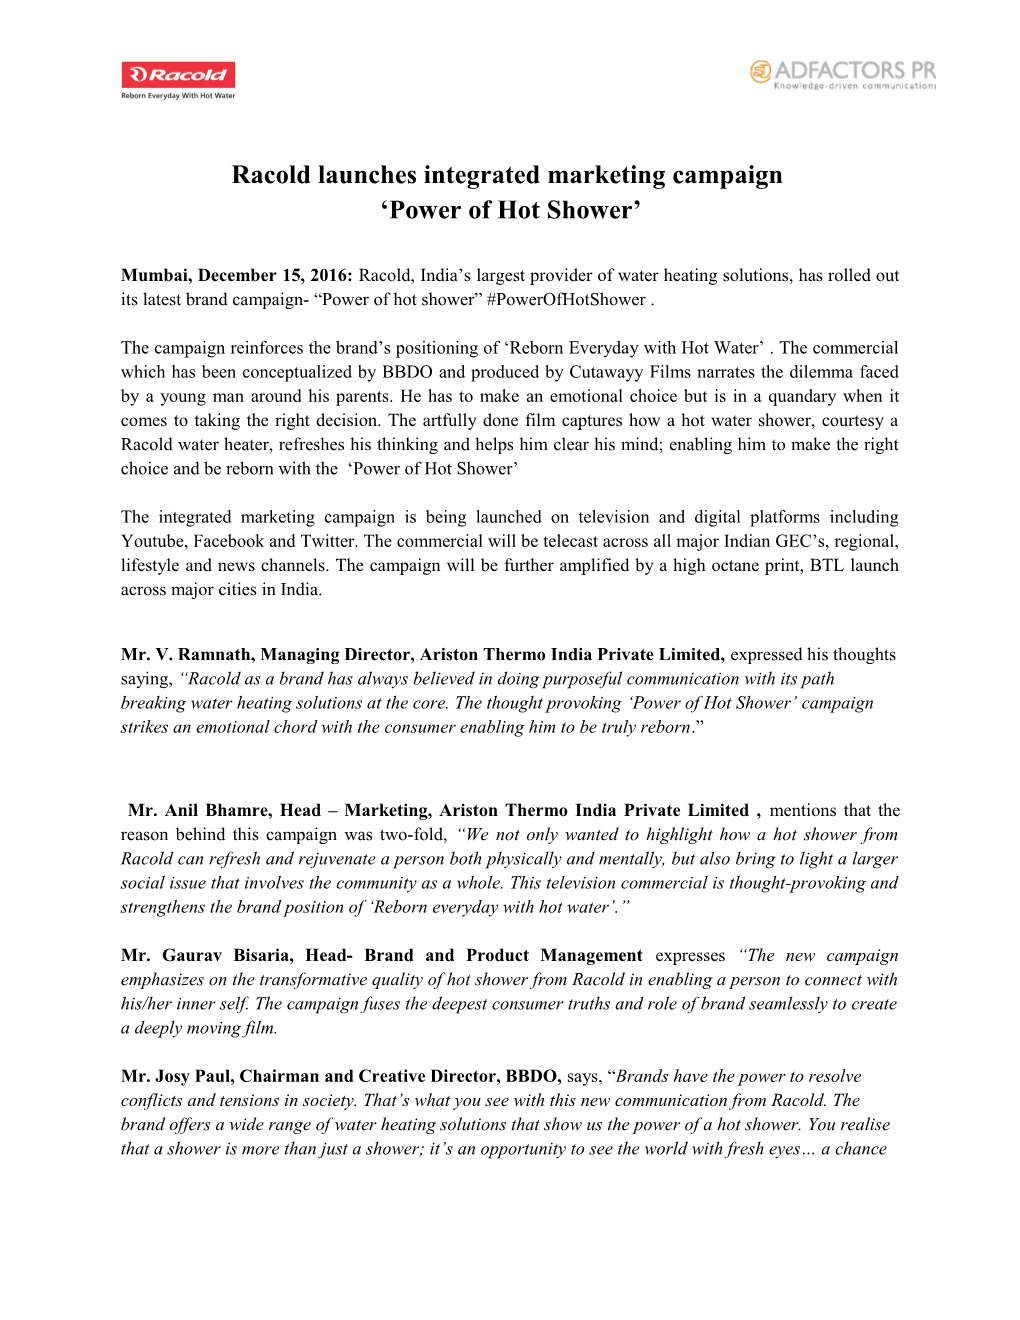 Racold Launches Integrated Marketing Campaign